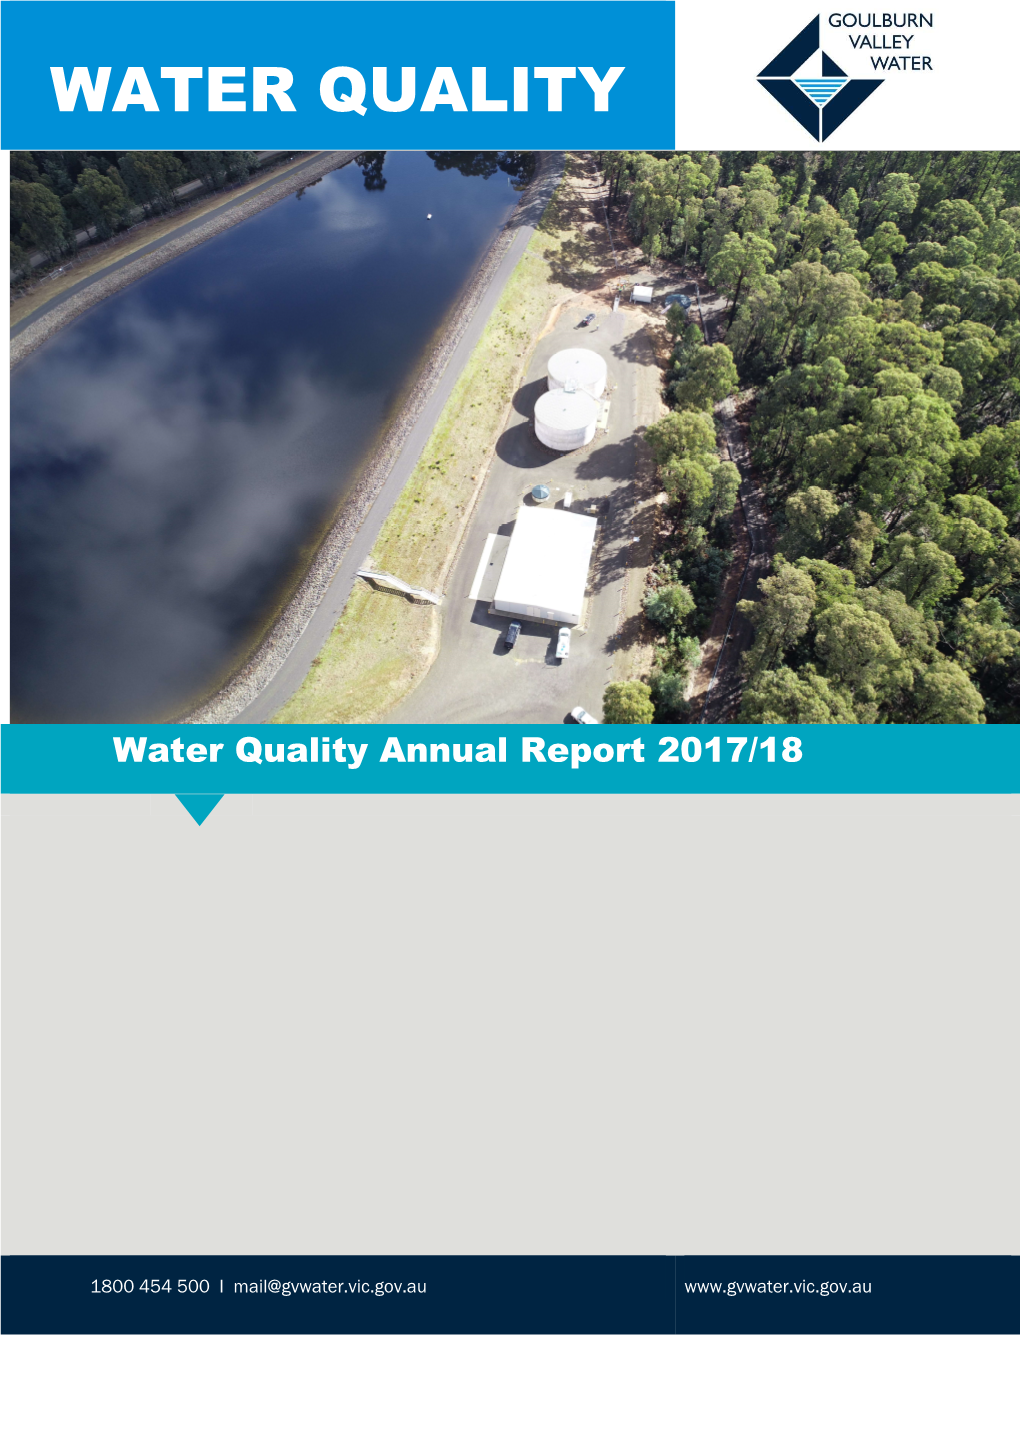 Water Quality Annual Report 2017/18